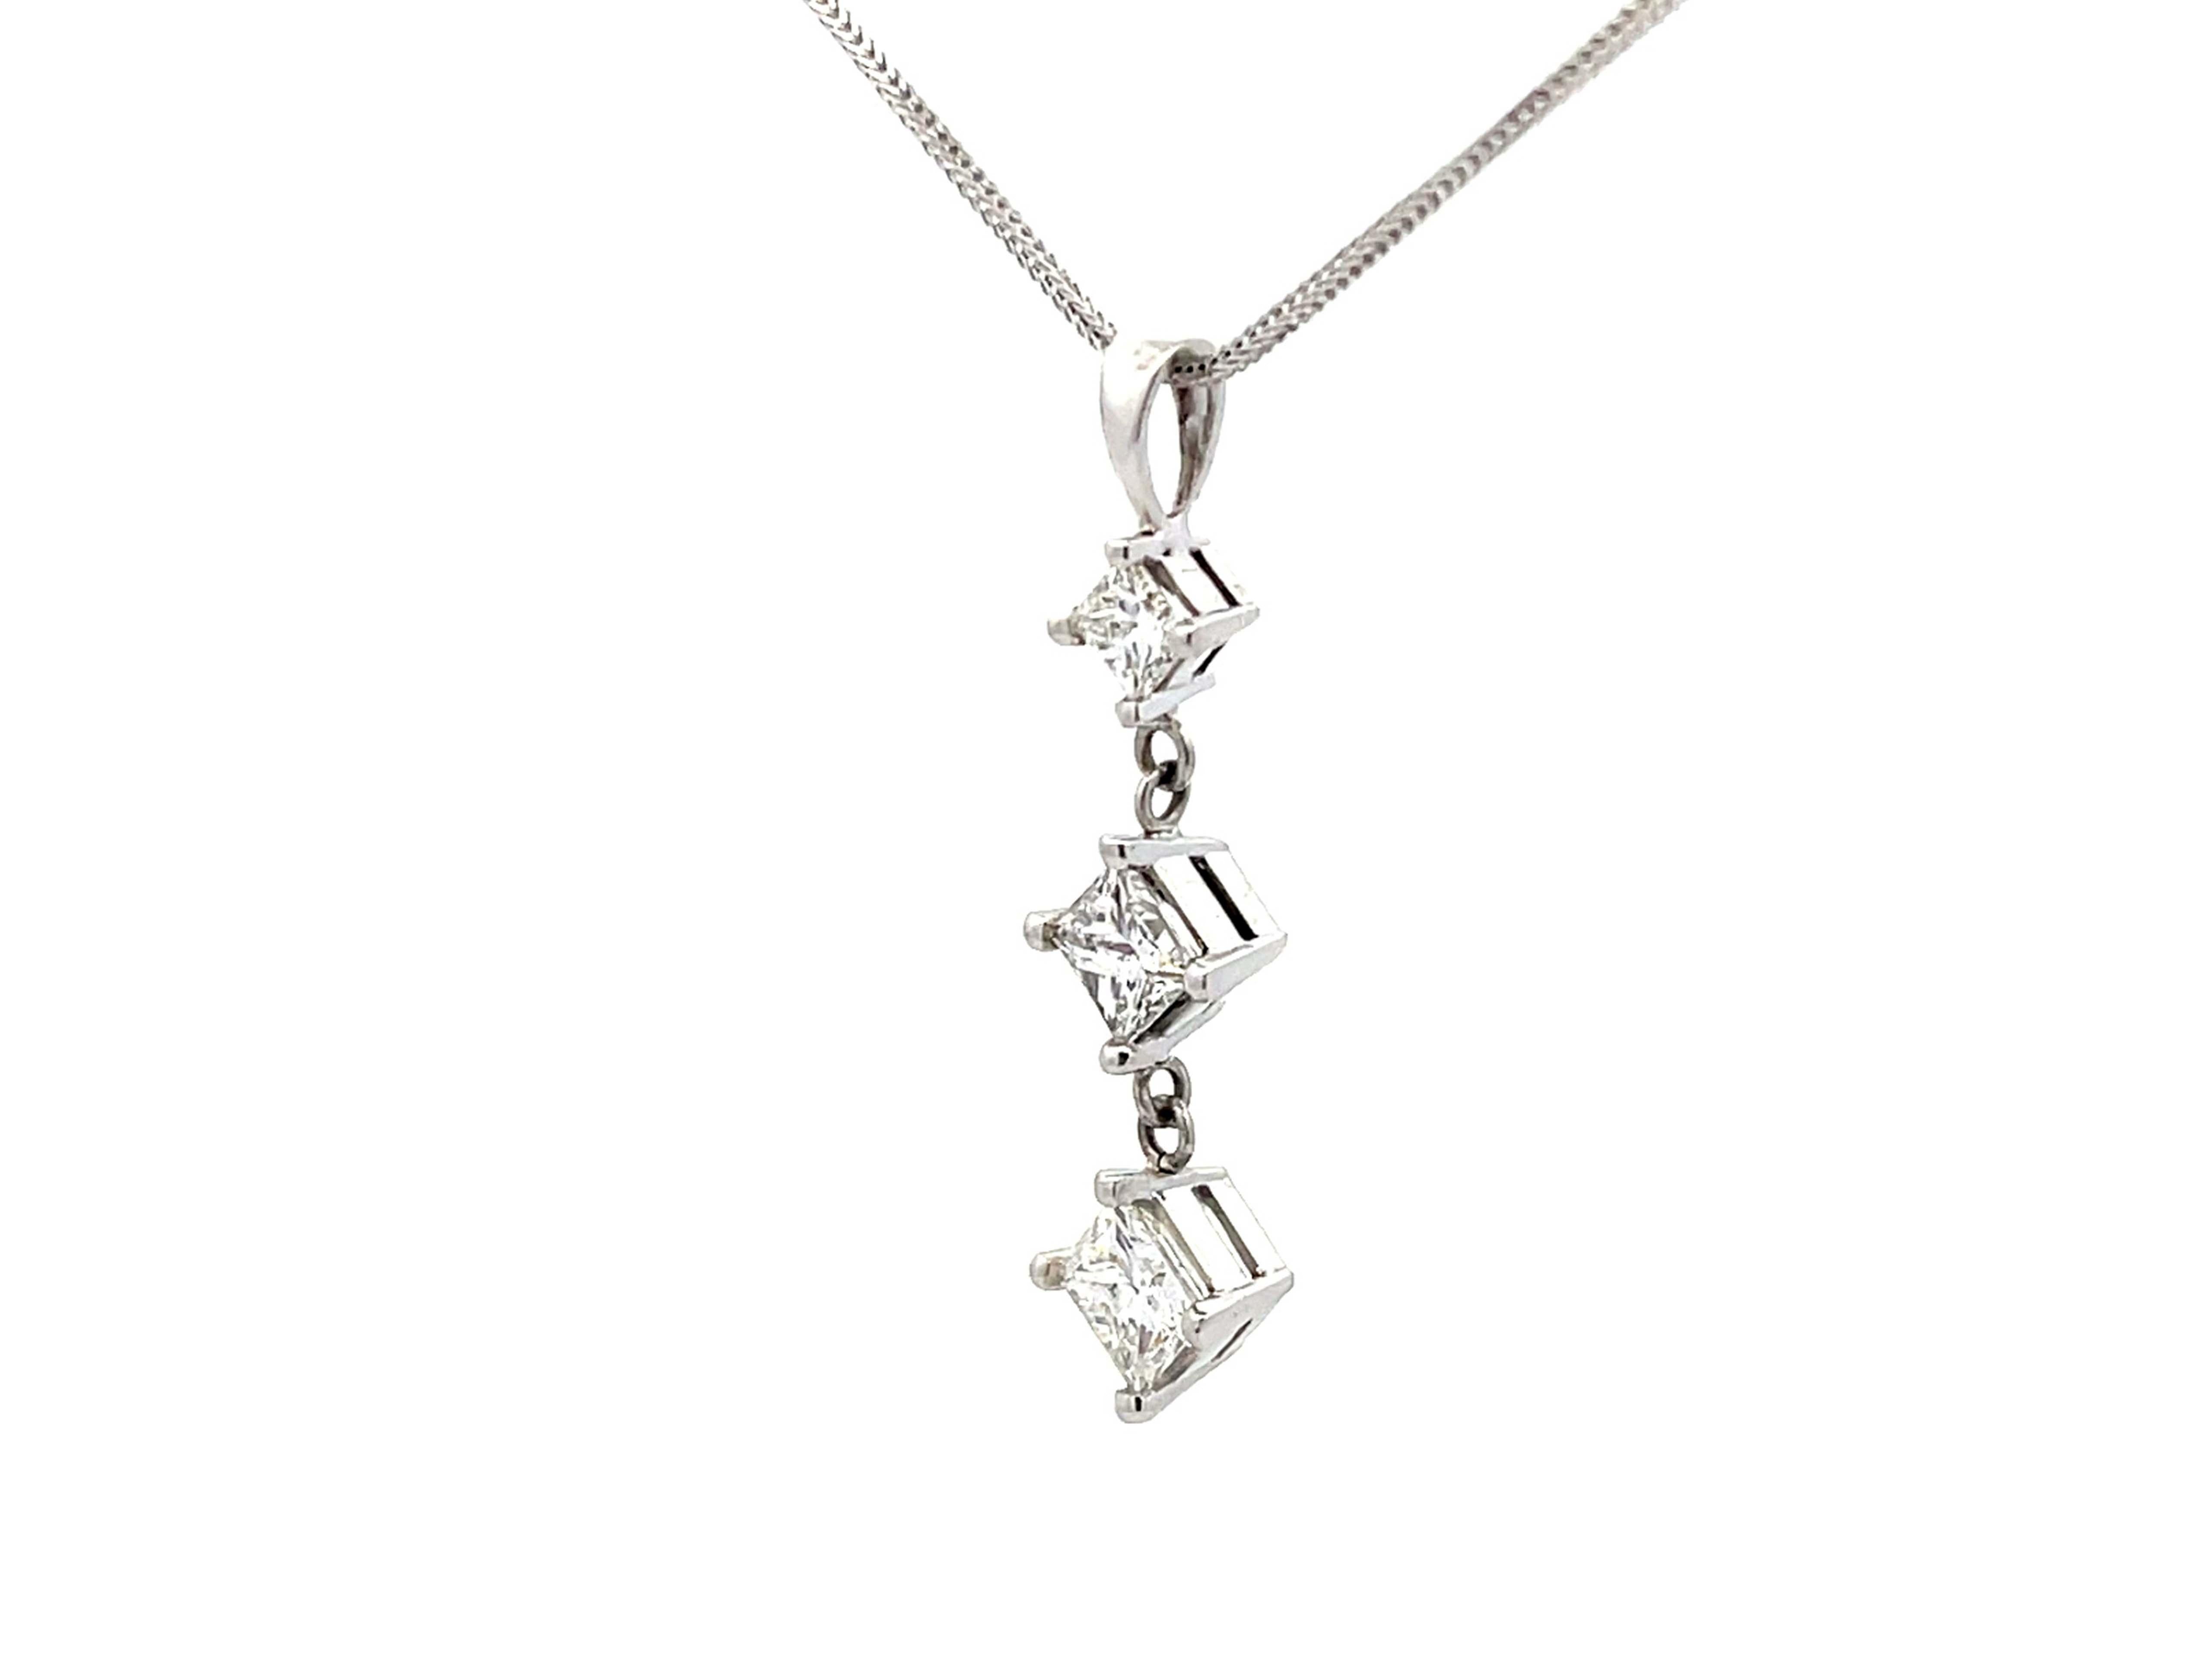 1.5 Carat Three Princess Cut Diamond Drop Necklace in 14k White Gold In Excellent Condition For Sale In Honolulu, HI